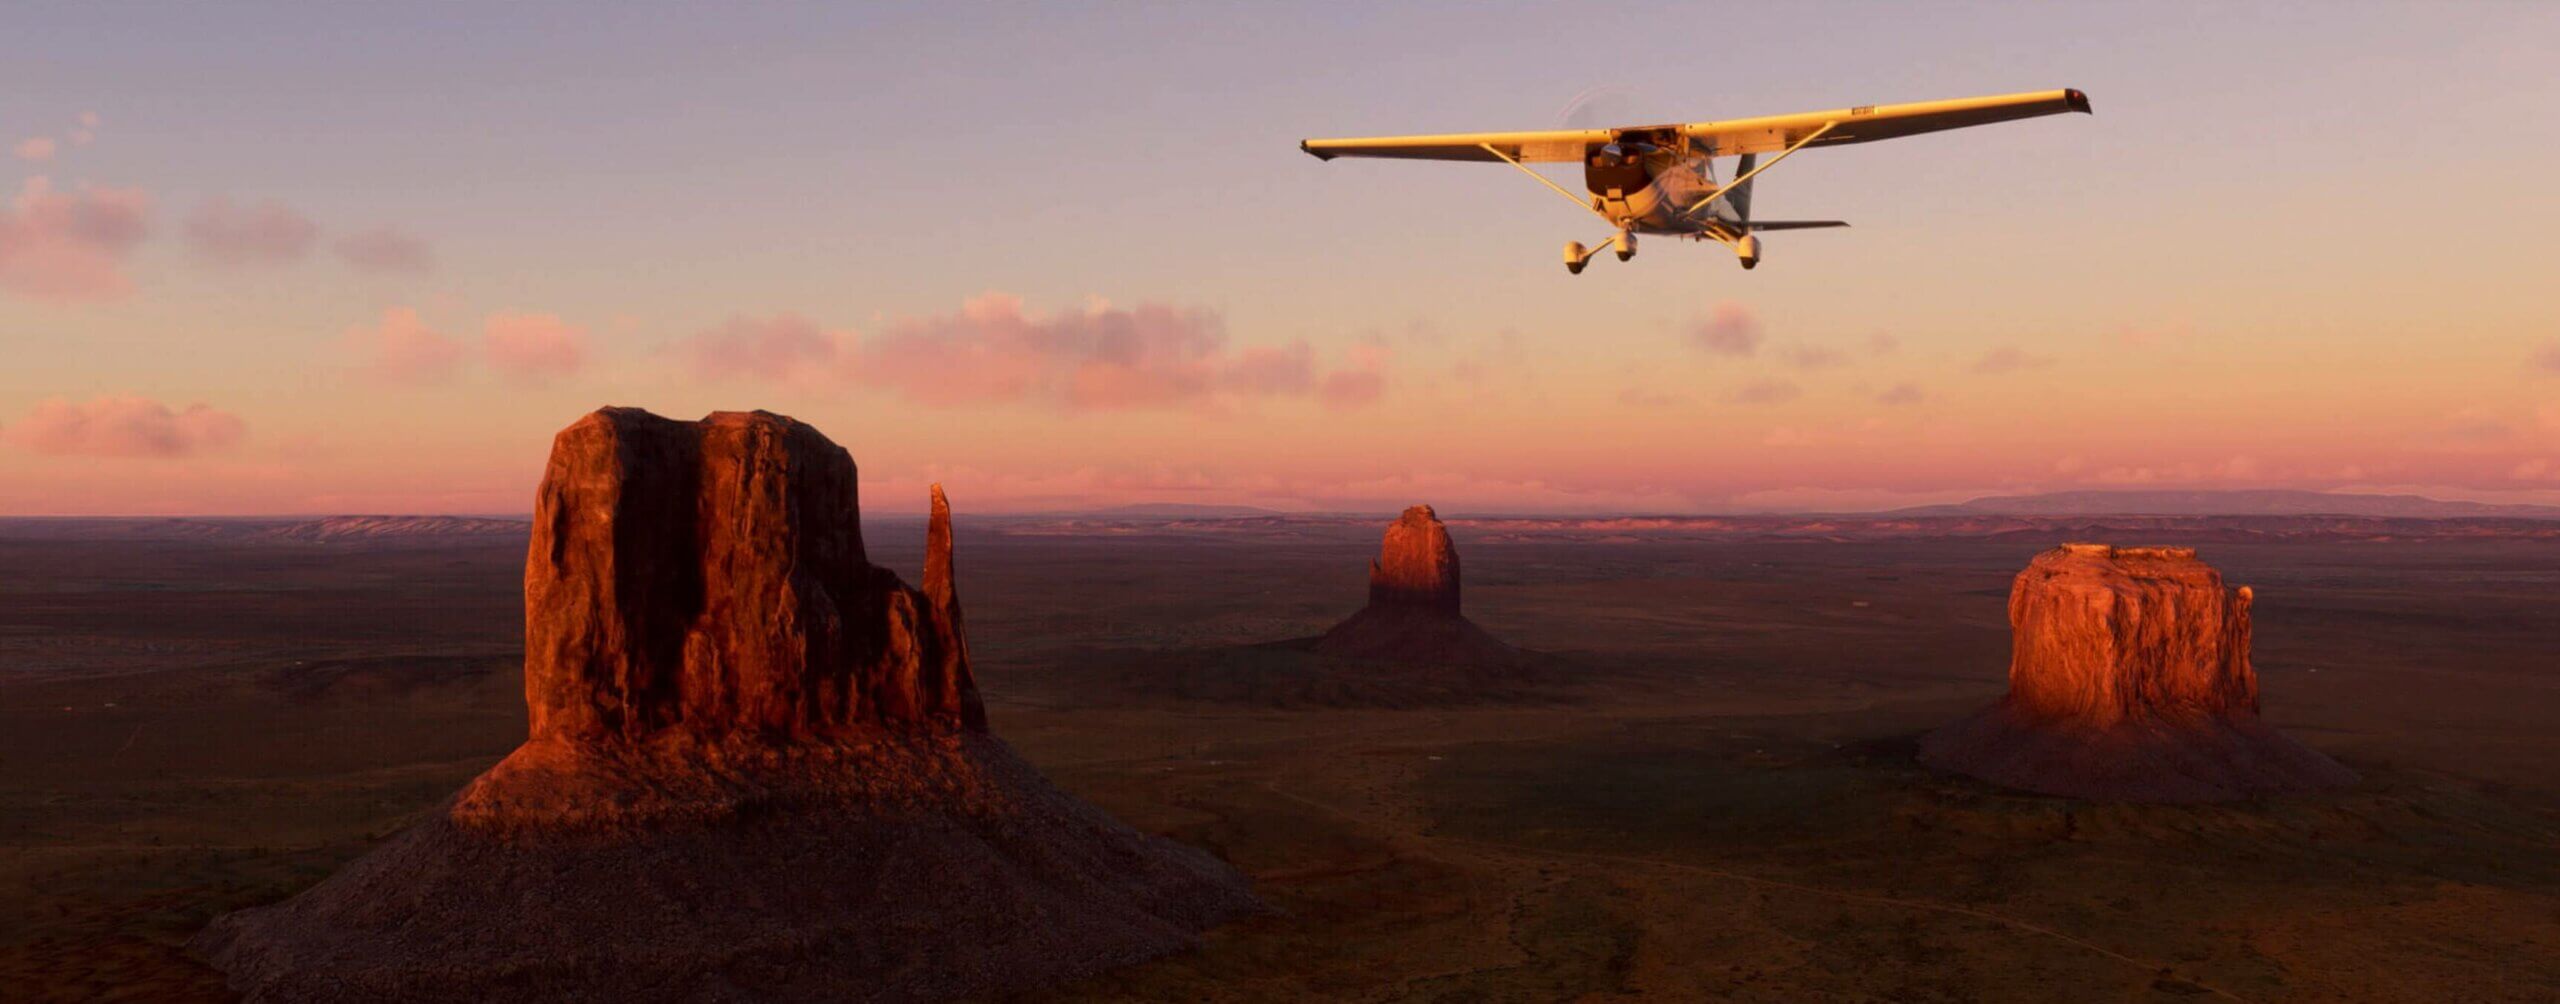 A plane flies over monument valley